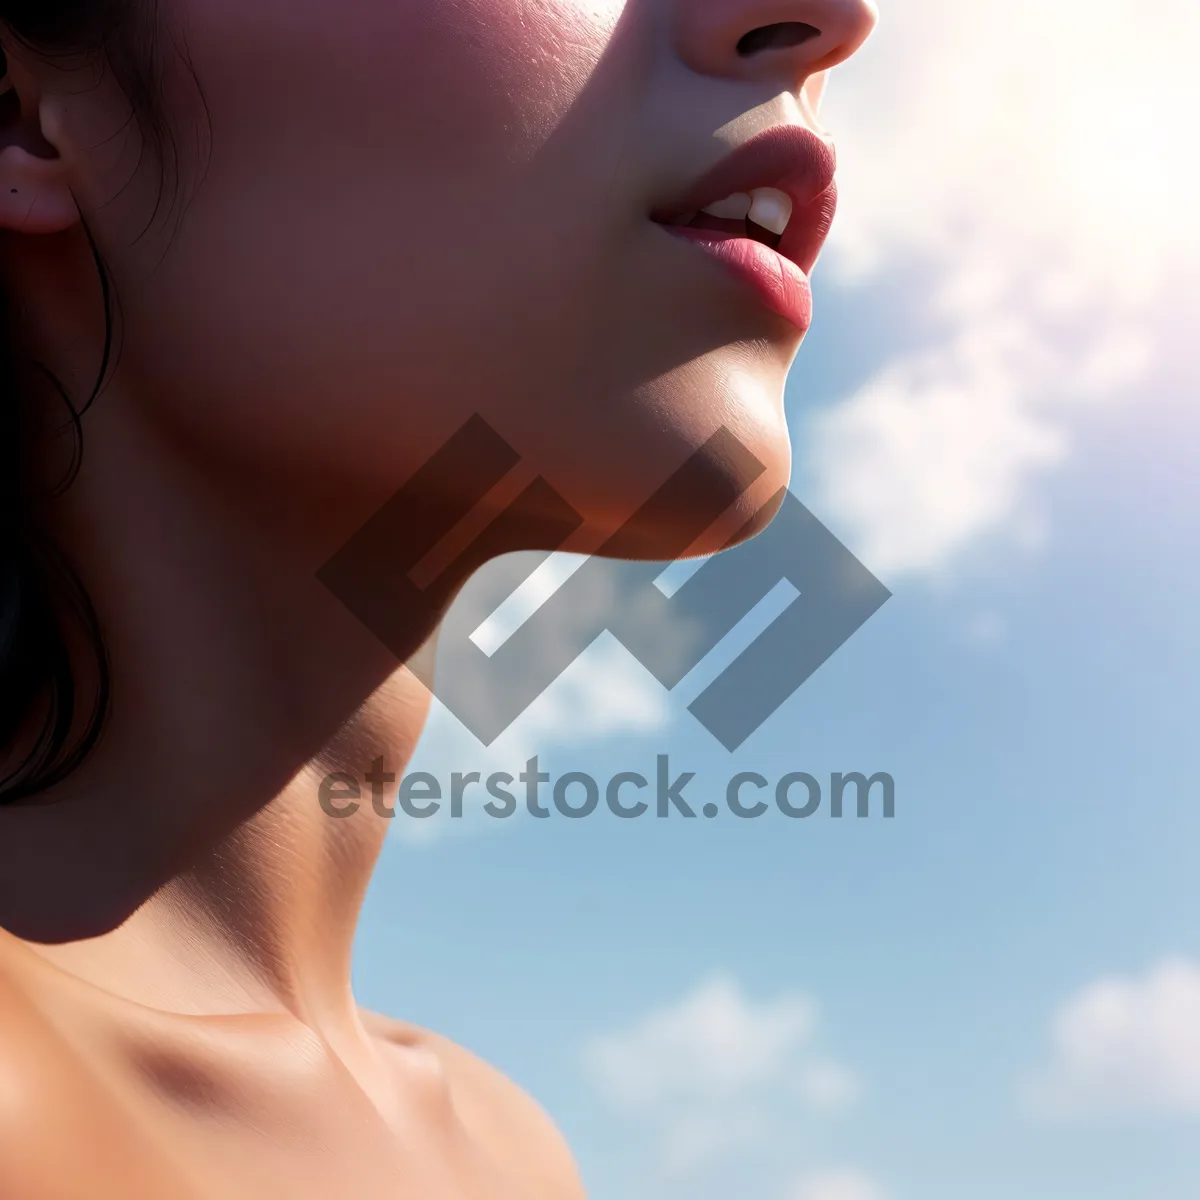 Picture of Radiant Beauty: Clean & Attractive Skincare Portrait